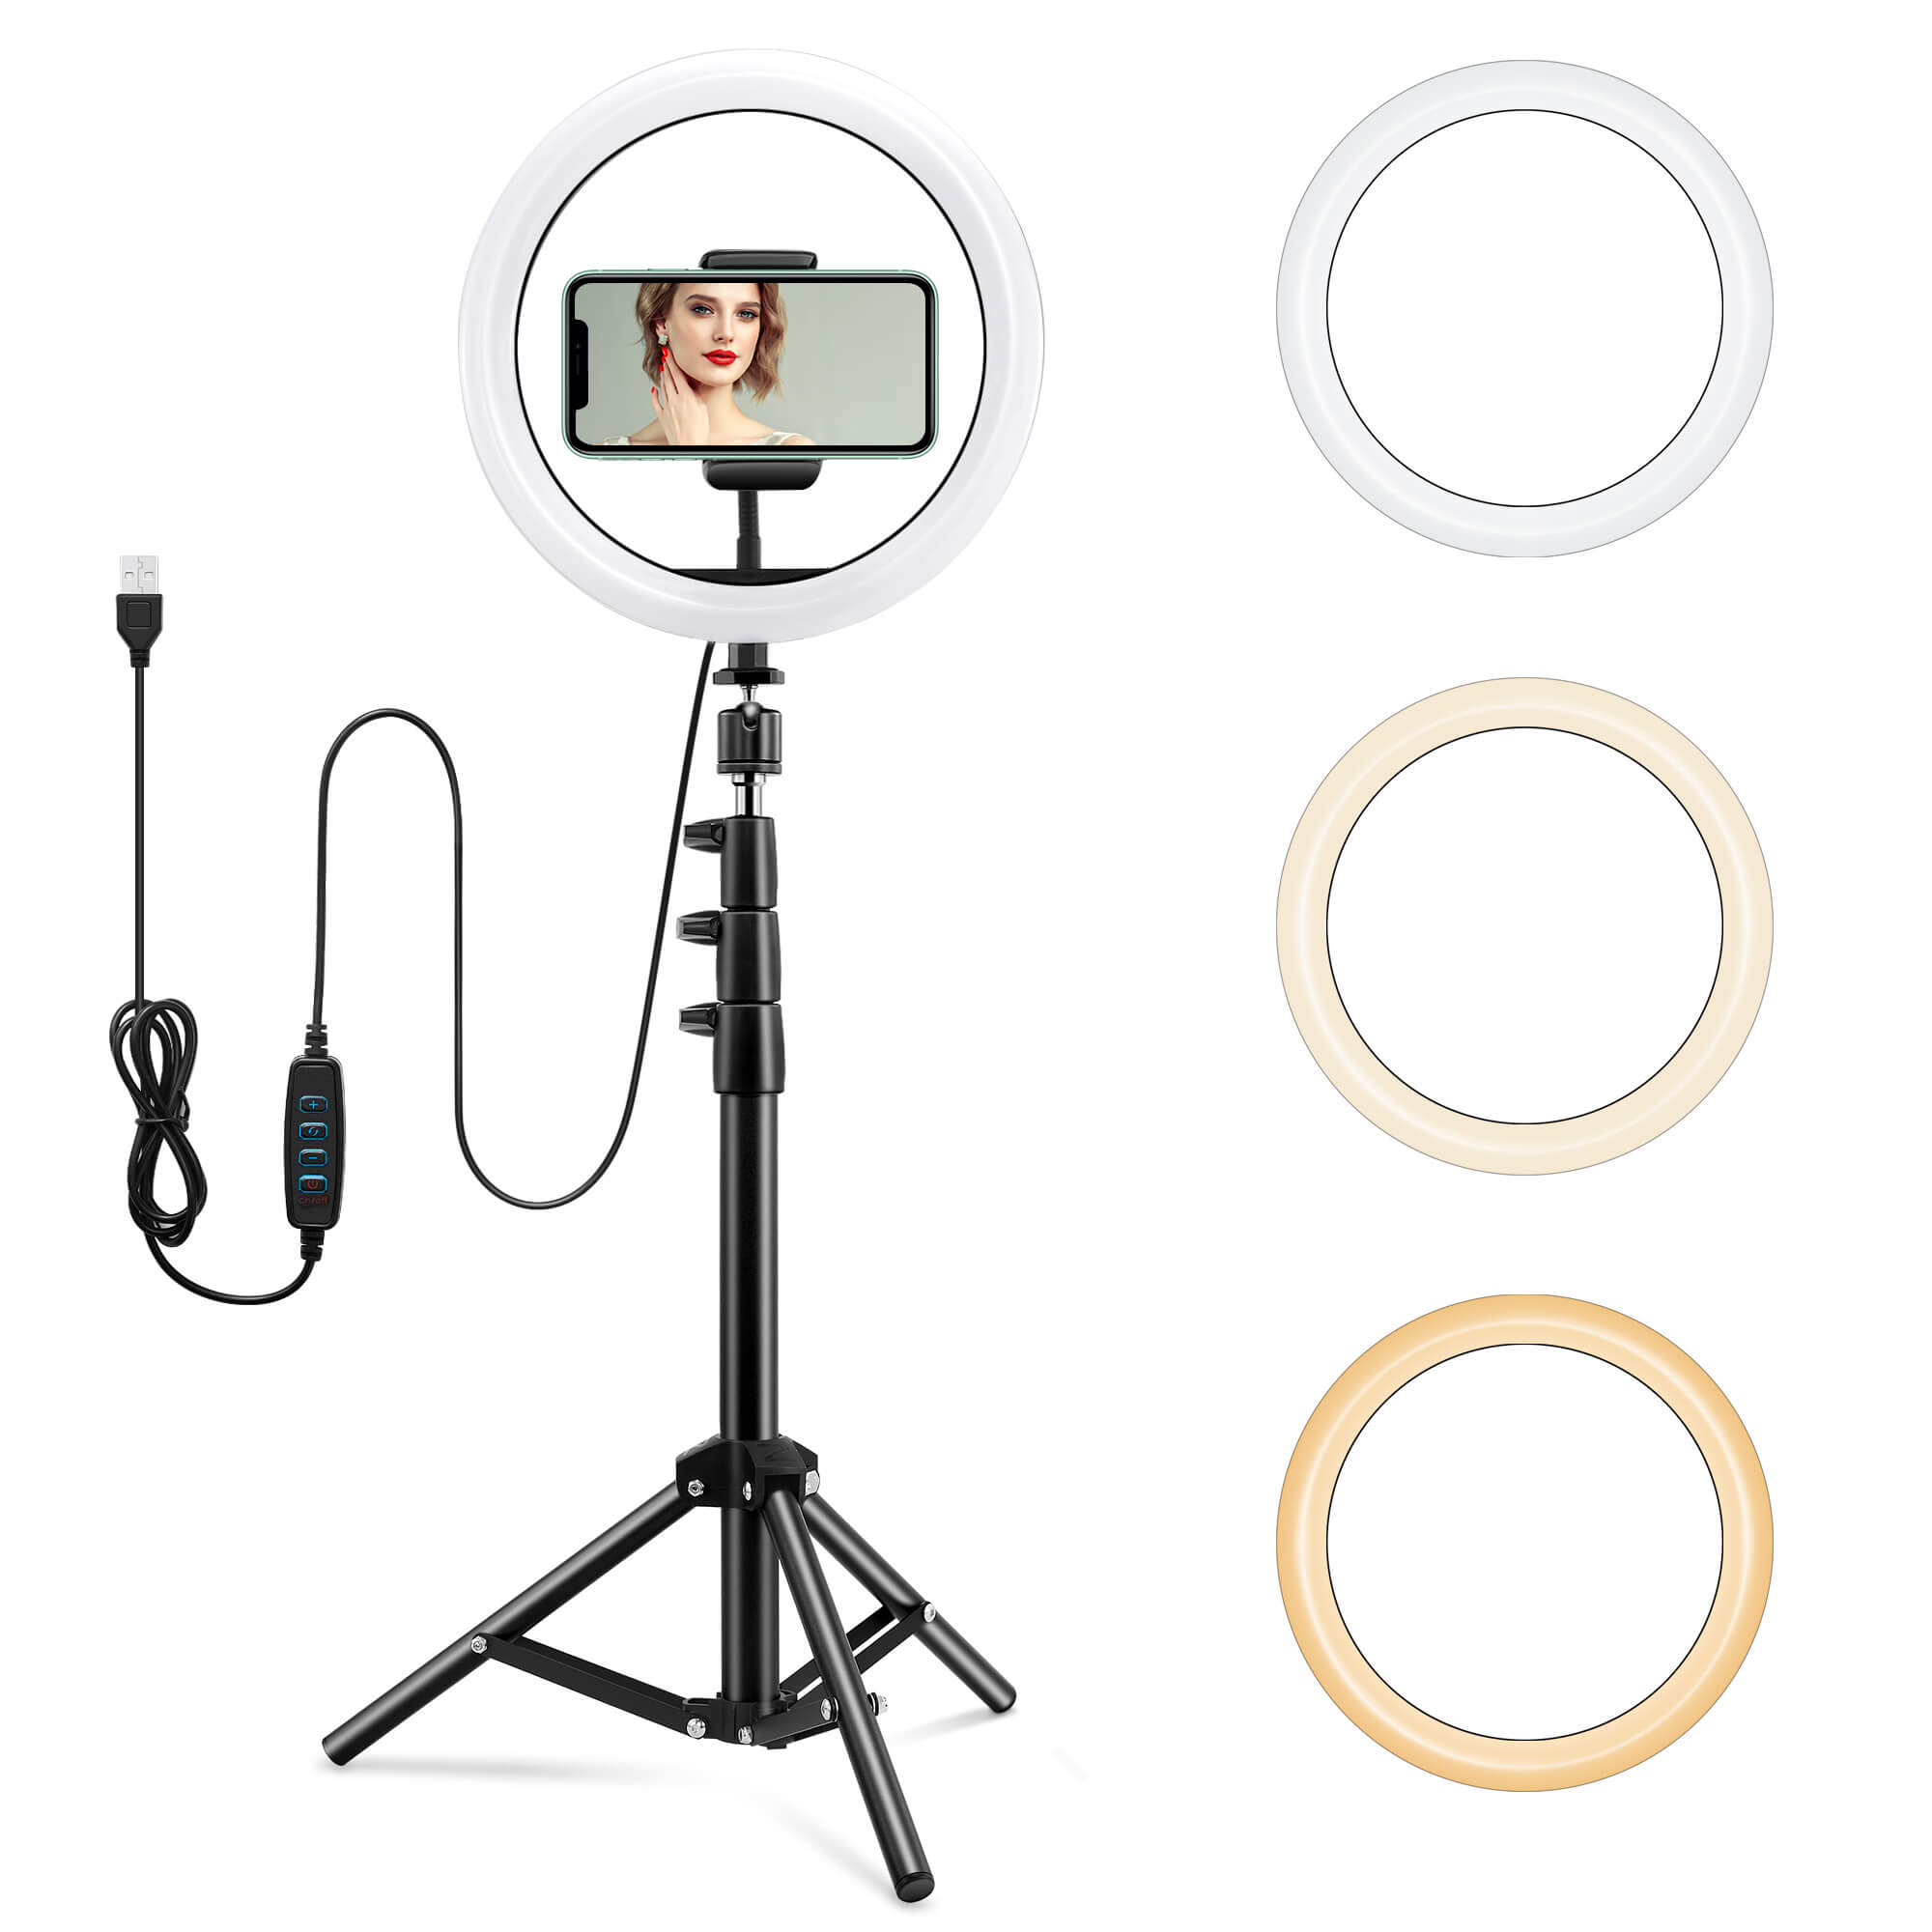 3 Lighting Modes and 11 Brightness Levels 16.56 to 53.5 Ring Light for YouTube Video/Live Stream/Makeup/Photography Selfie Ring Light 10.2 Ring Light with Stand and Phone Holder Adjustable